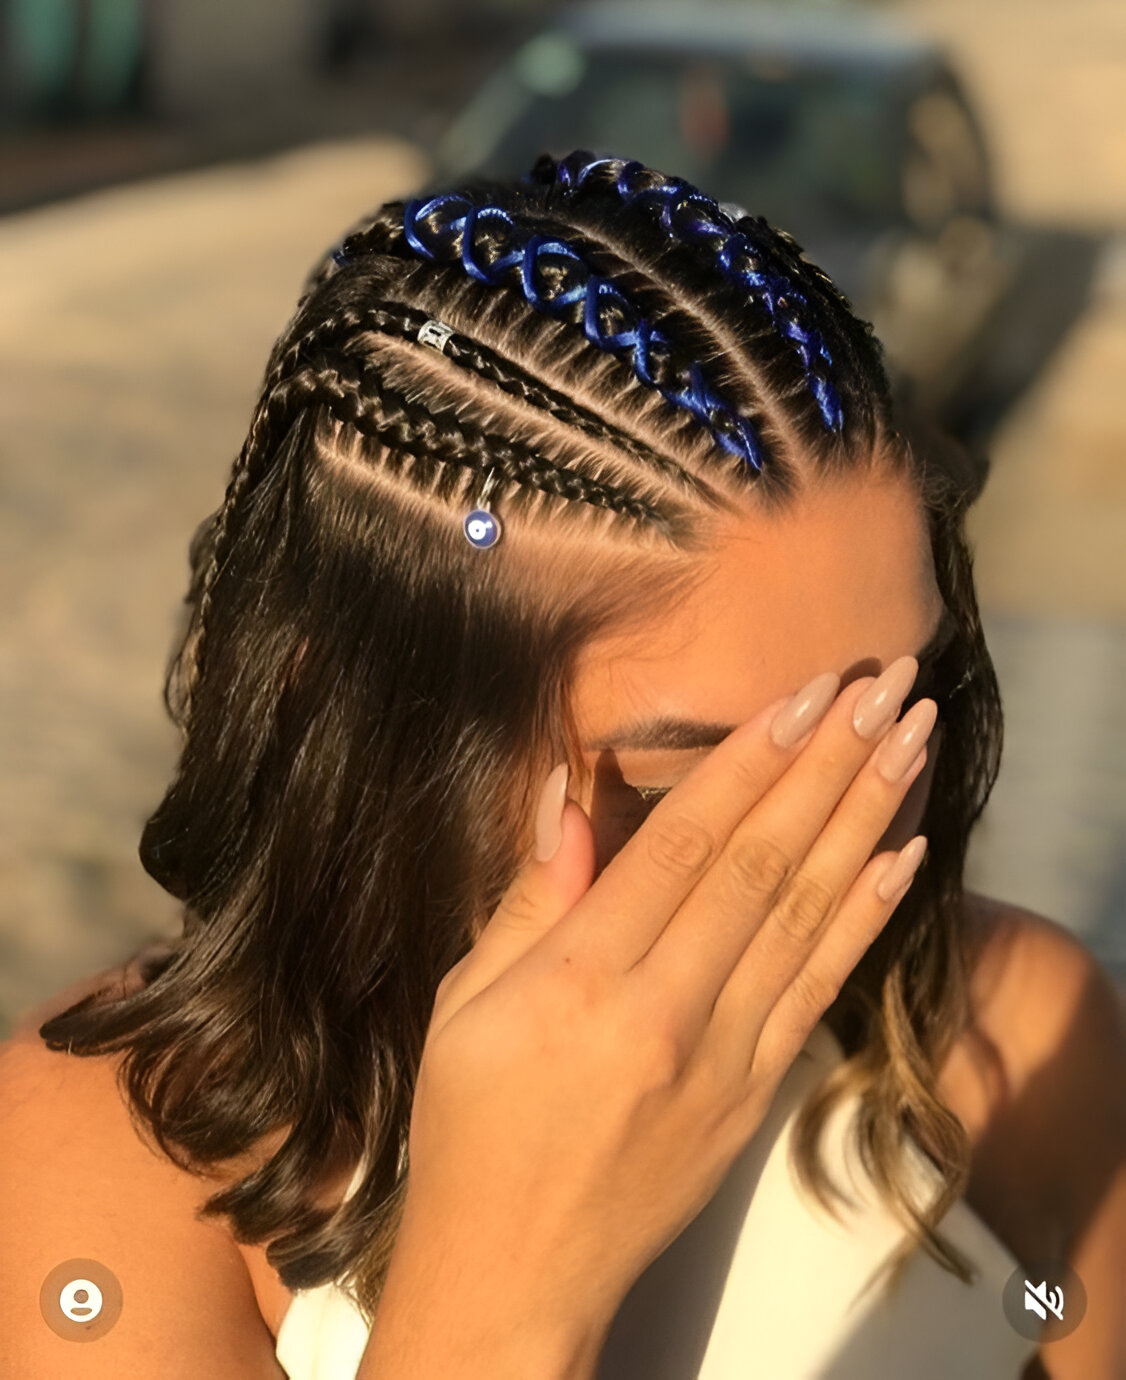 Short Braided Hairstyles With Blue Ribbons